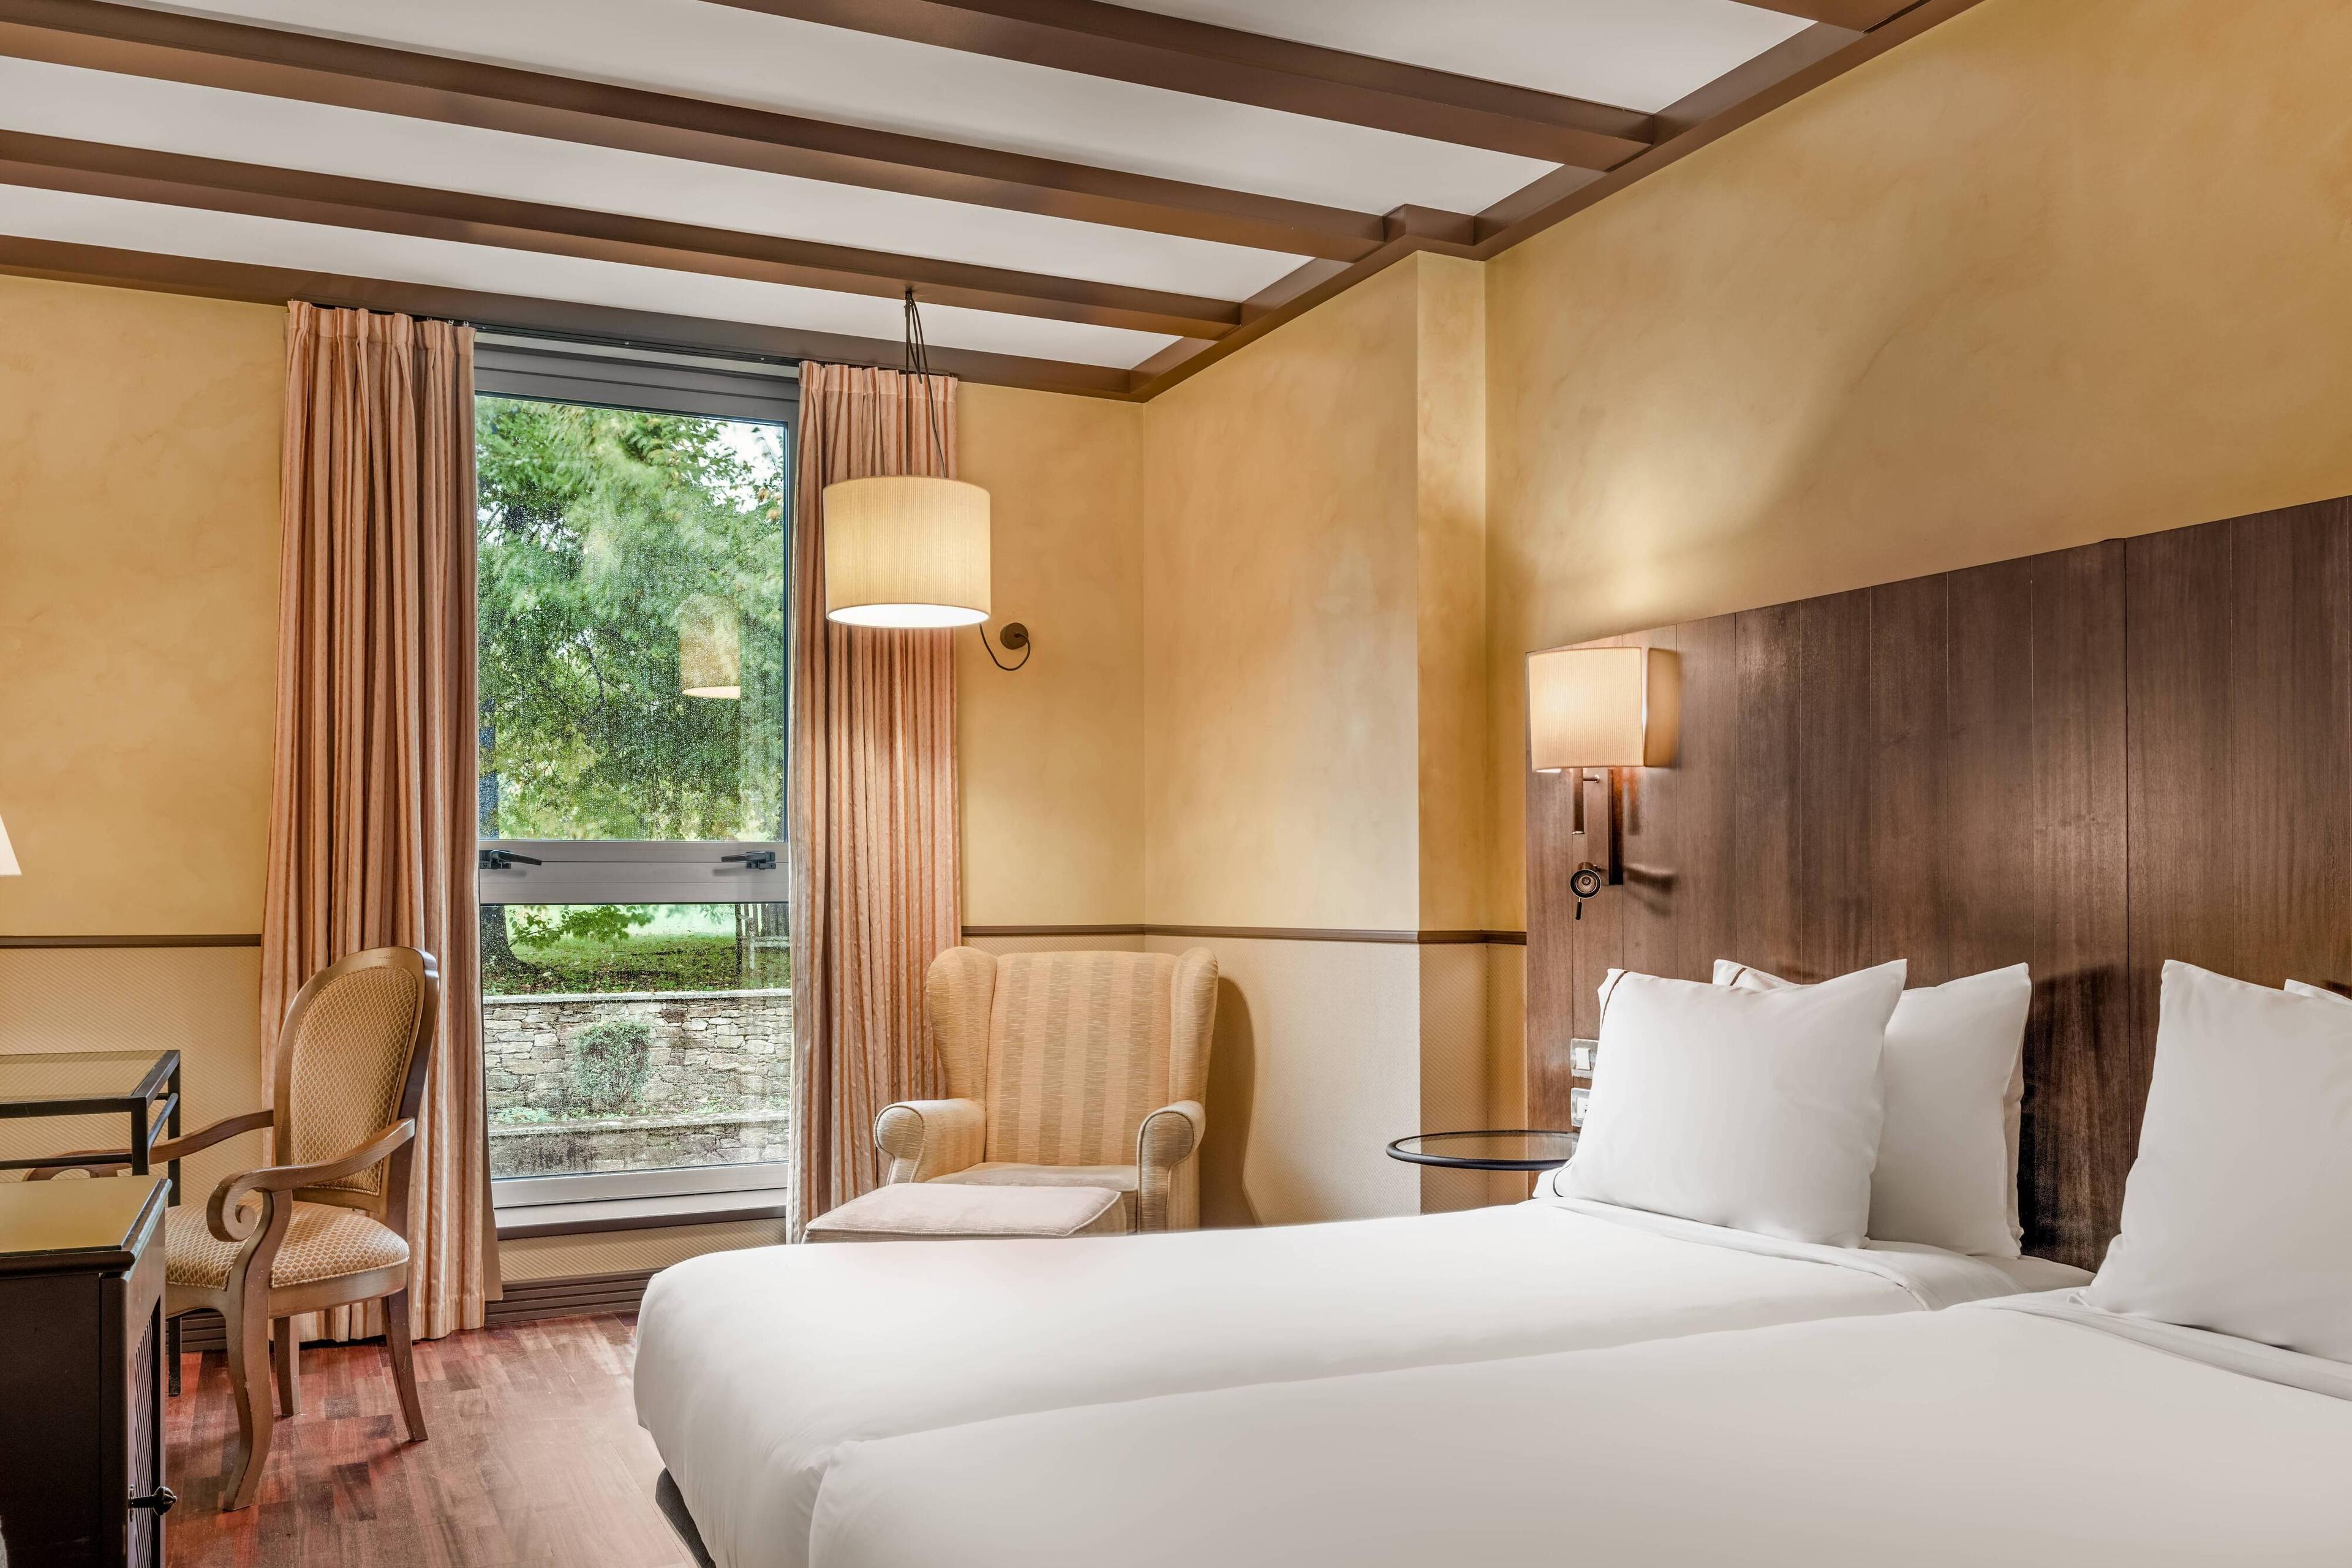 Sleep comfortably in our Twin/Twin Deluxe Rooms . Enjoy rustic cozy furnishings, plush bedding and reading lamps.